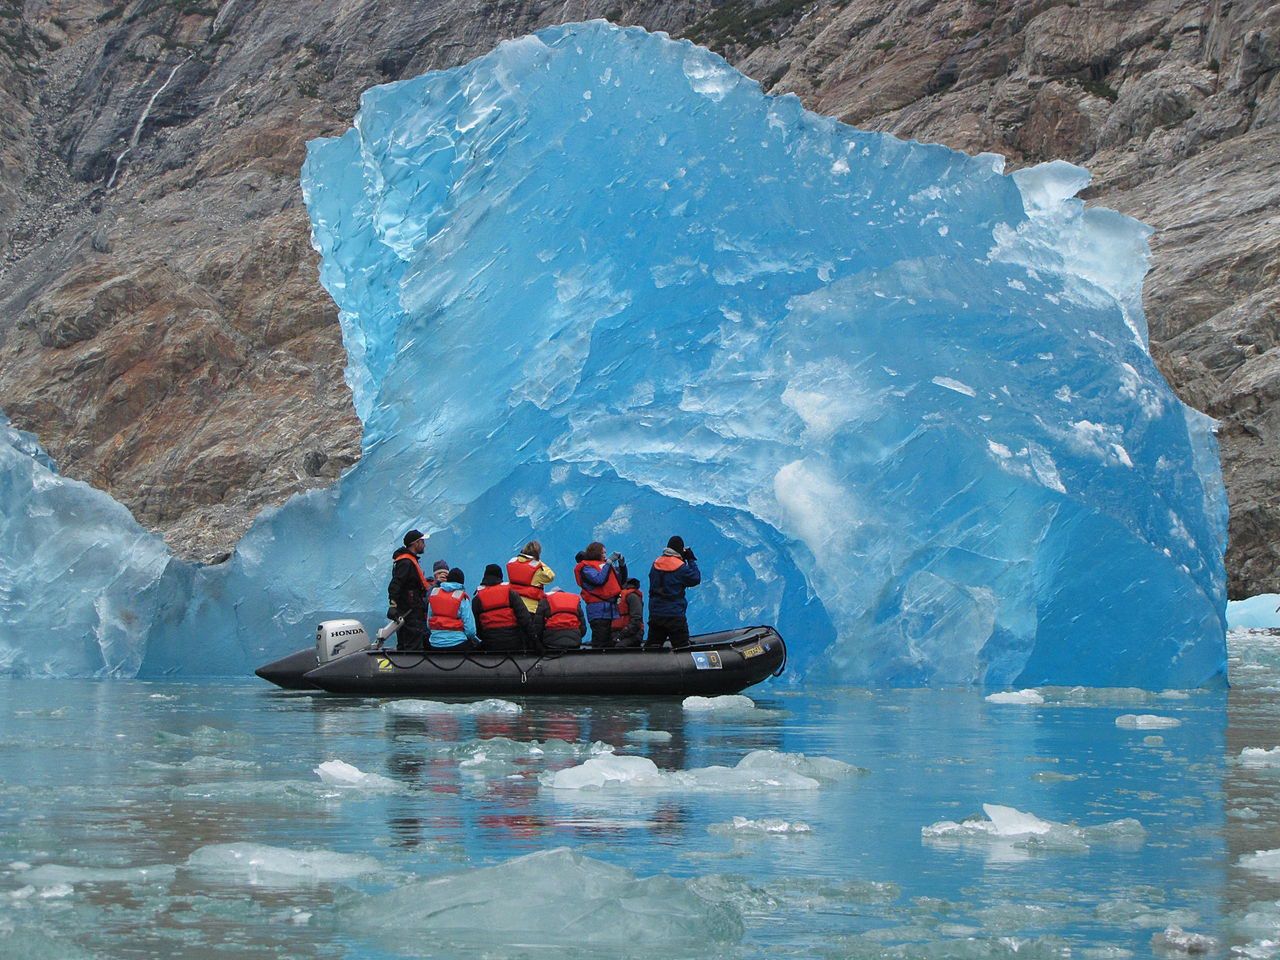 Glacial blue ice is the most valuable for paleoclimatic research.